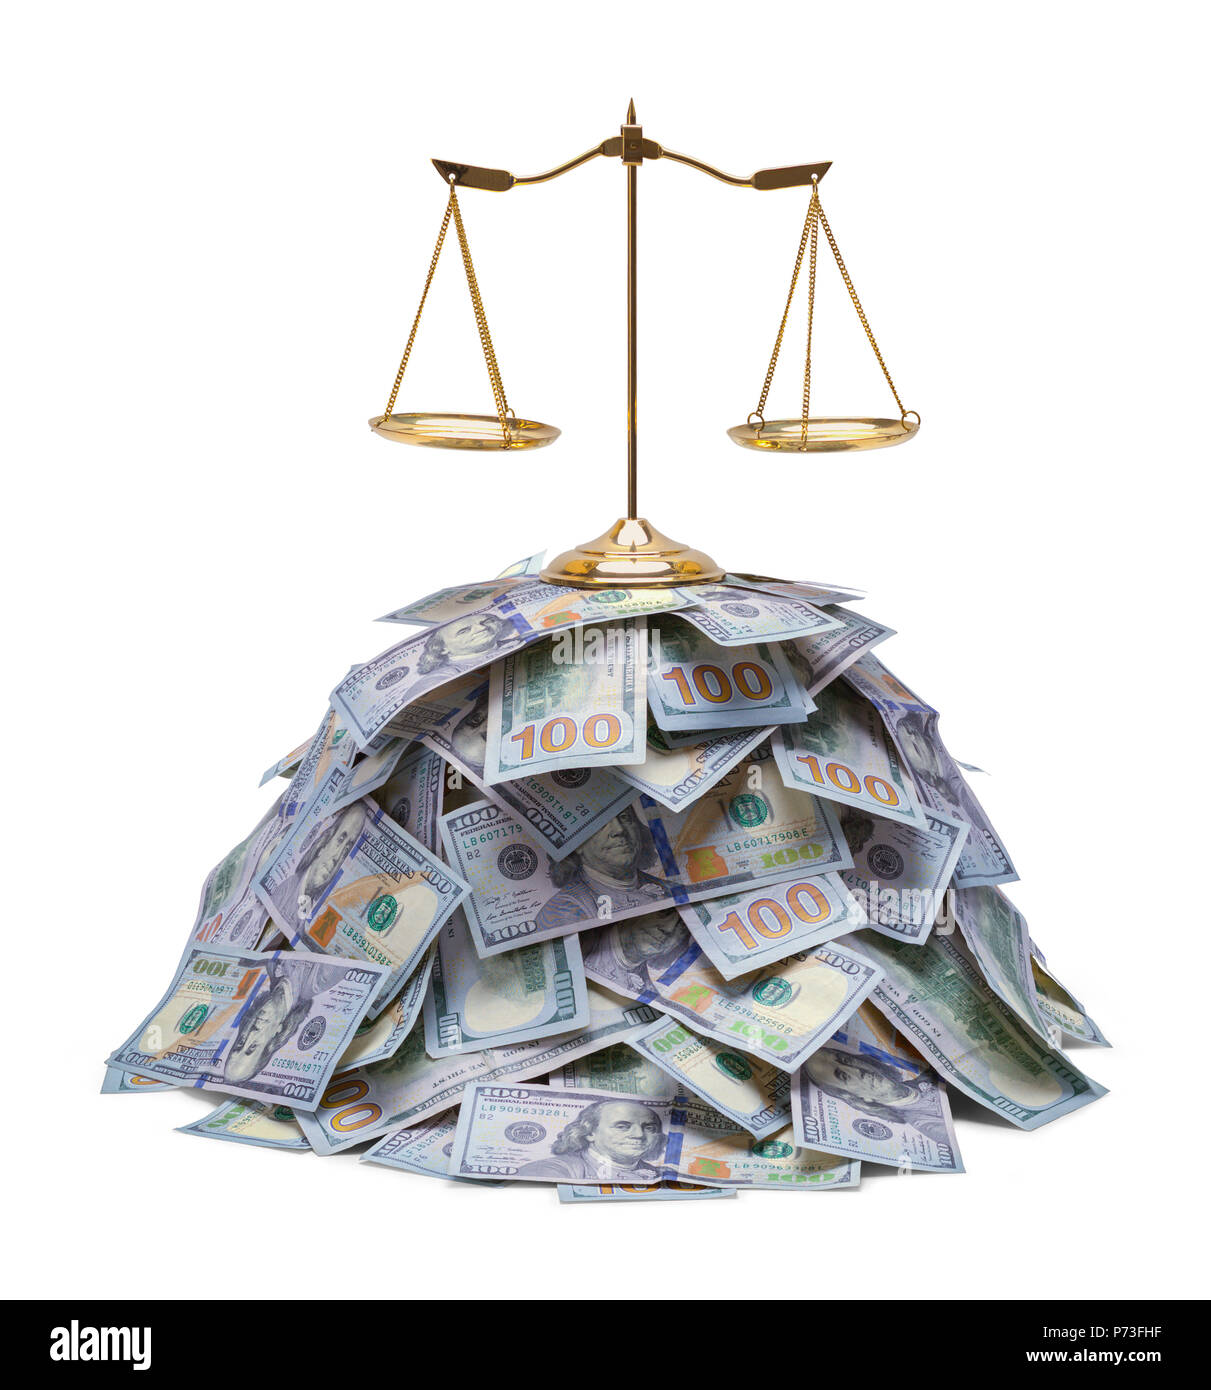 Pile of Money with Scales of Justice on Top Isolated on White. Stock Photo